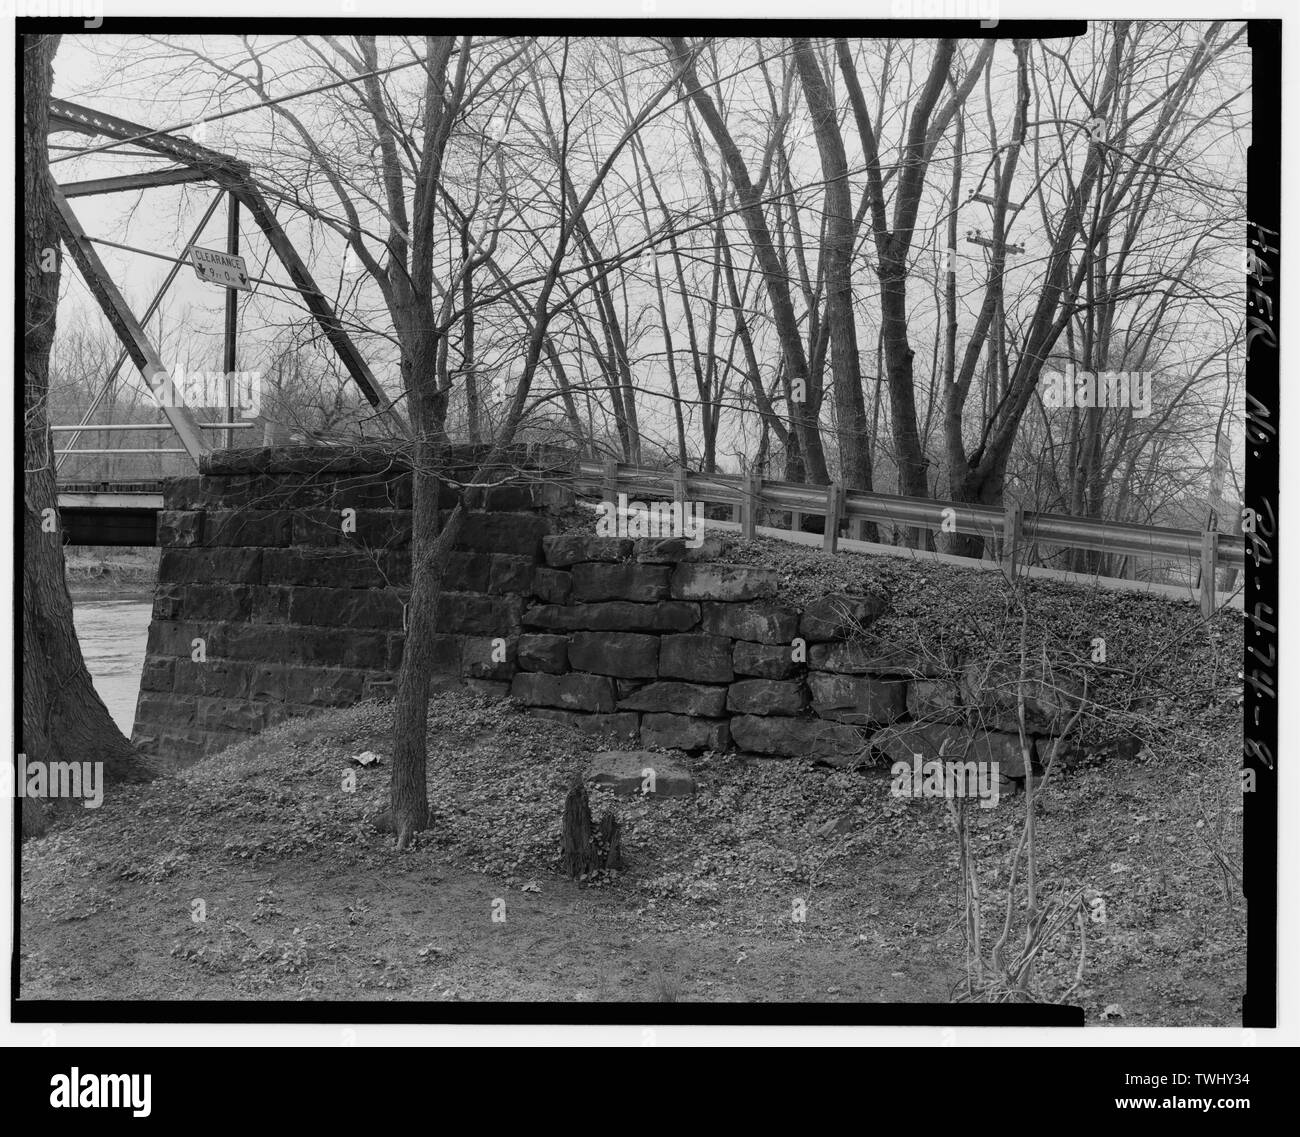 SIDE VIEW OF NORTHEASTERN ROCKFACED DRESSED AND MORTARED STONE BRIDGE ABUTMENT (LEFT) AND DRESSED, DRY-LAID RETAINING WALL (RIGHT). FACING WEST. - Coverts Crossing Bridge, Spanning Mahoning River along Township Route 372 (Covert Road), New Castle, Lawrence County, PA; Lawrence County Commissioners; Morse Bridge Company; Covert, John W; Kirk, H M; Craig, Jos; Chambers, St S; Wagoner, A G; Morse, Henry G; Morse, C J; Lawrence County Bridge Department, sponsor; GAI Consultants, Incorporated, contractor; Christianson, Justine, transmitter; Croteau, Todd, project manager; Flores, Roland, field team Stock Photo